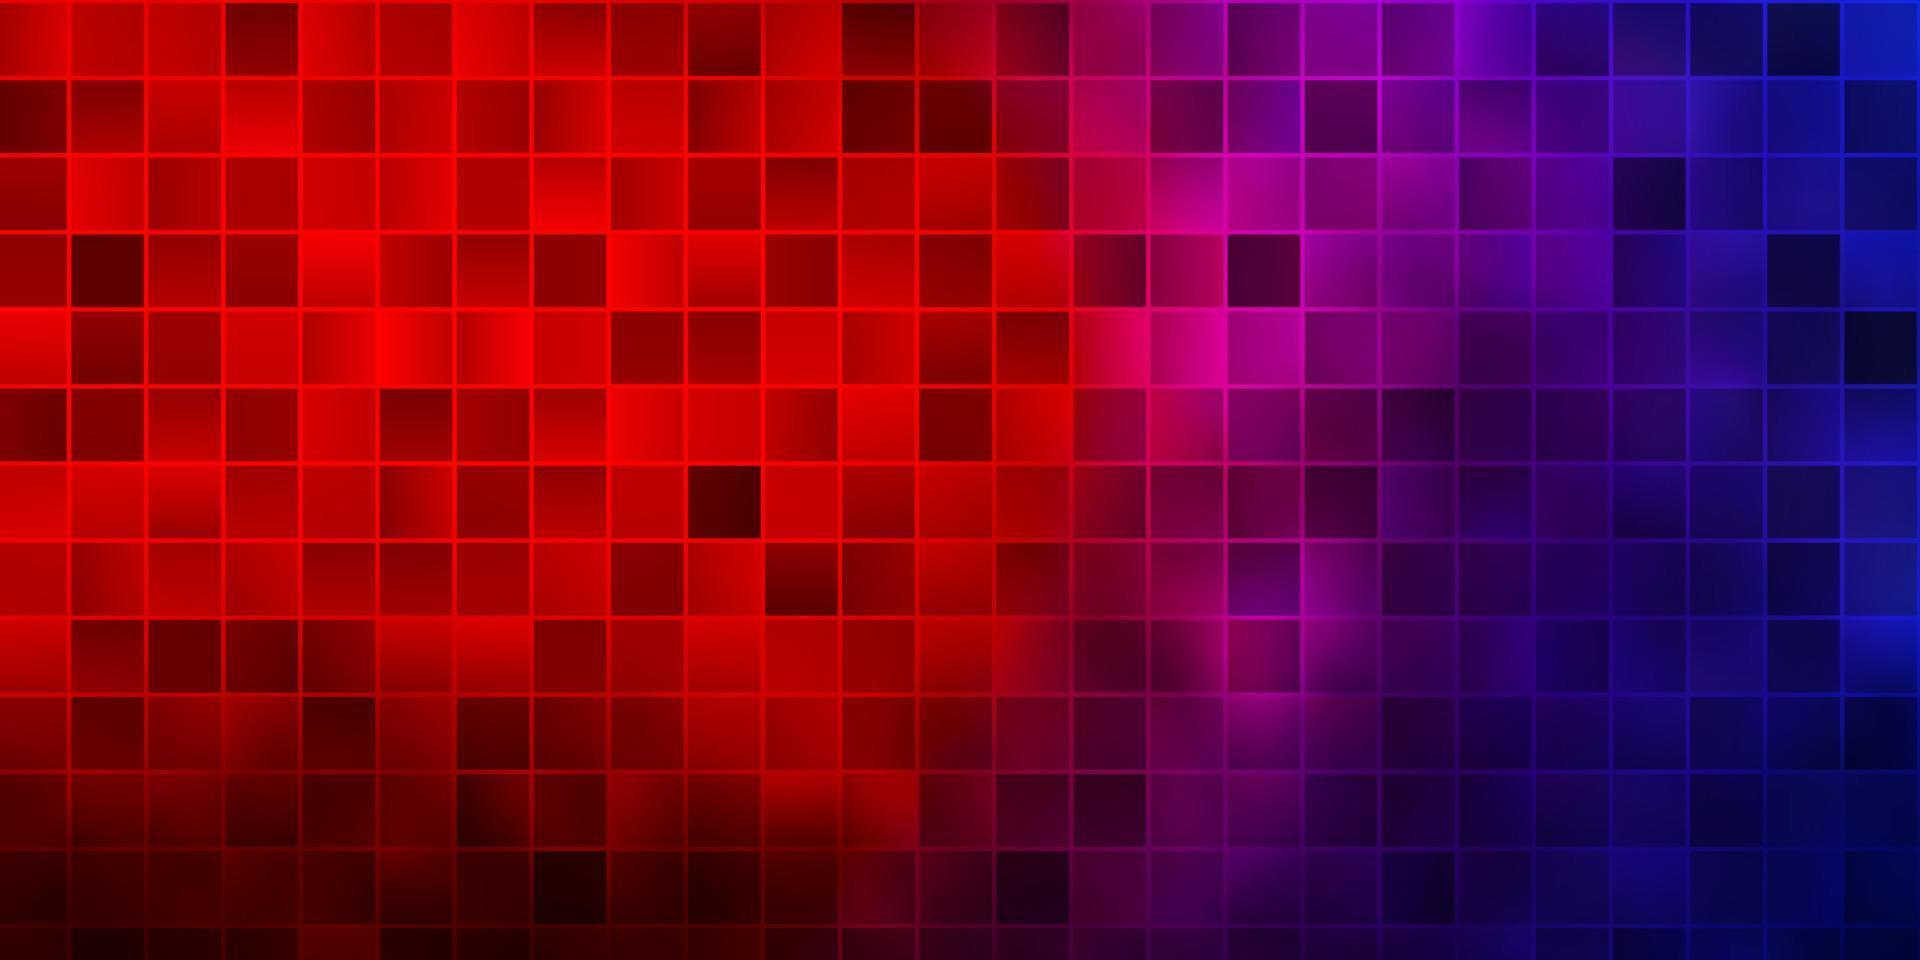 Light Blue, Red vector texture in rectangular style.